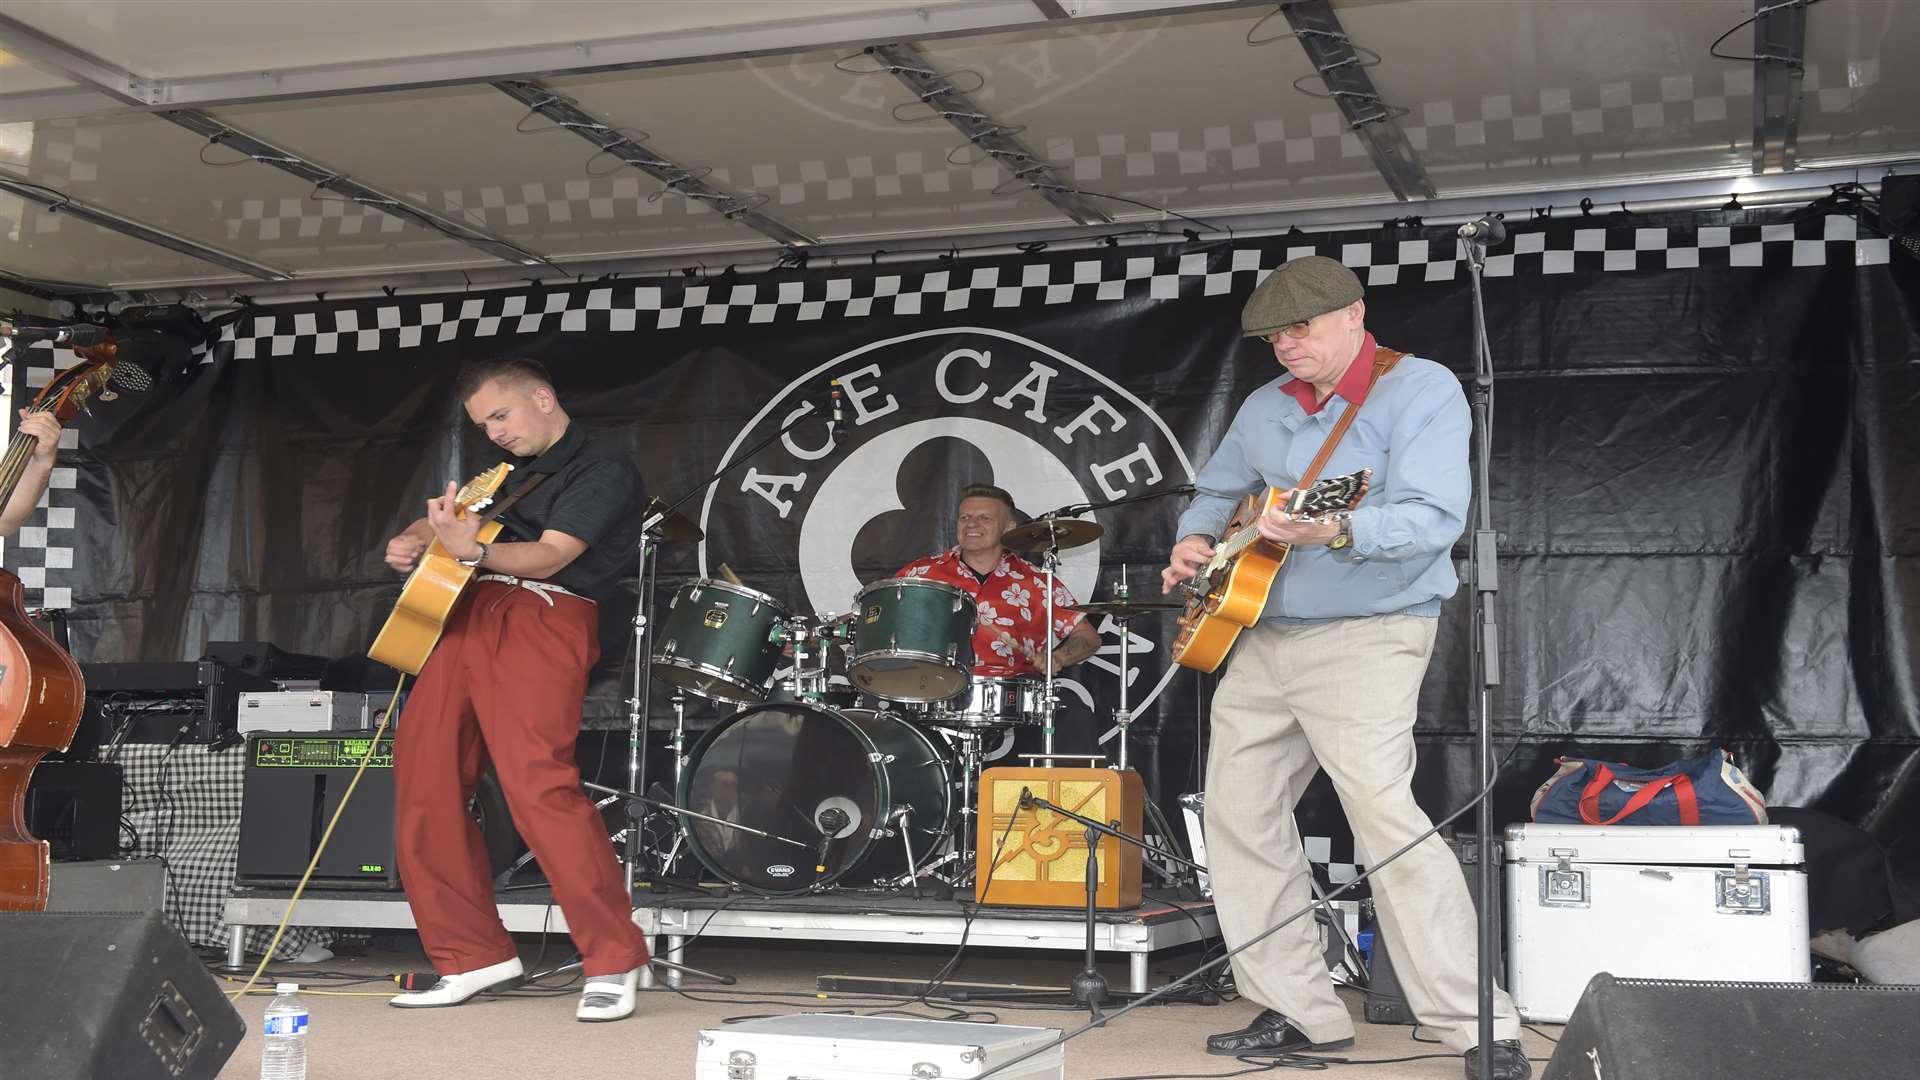 The Ace Cafe put on live music to entertain the crowds